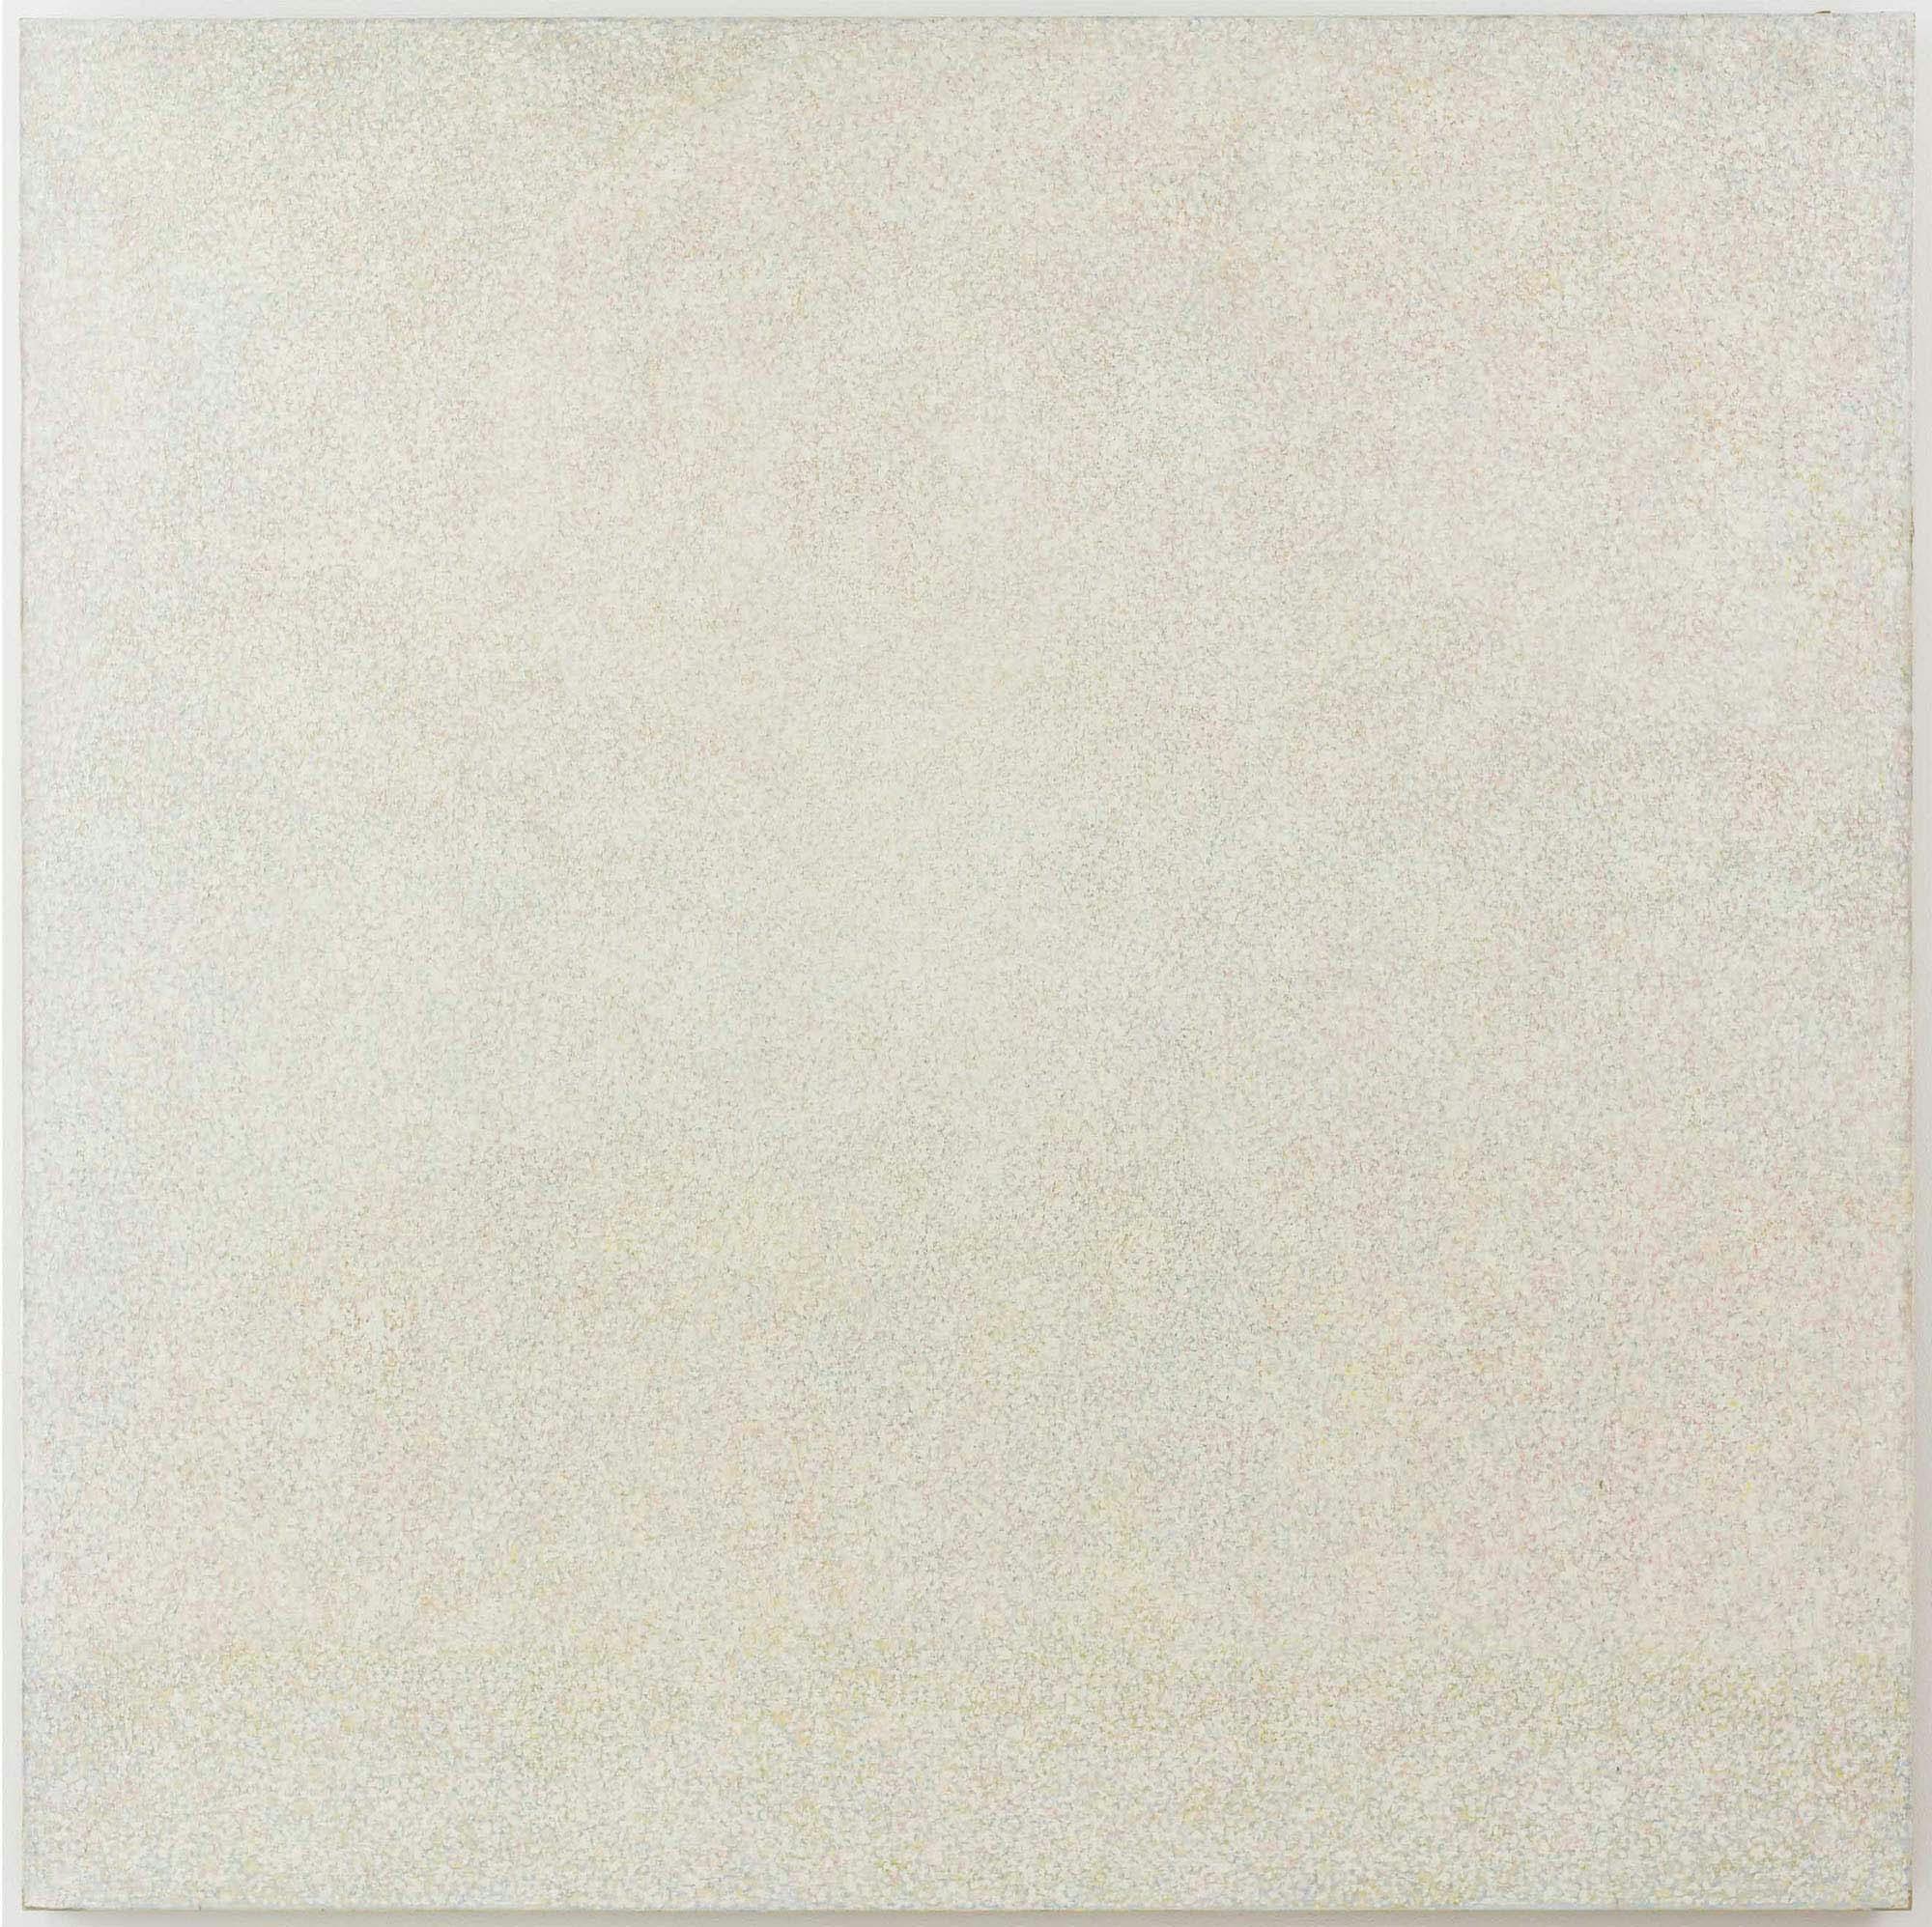 Radiance #1 White
1967
Oil on canvas
80 x 80 in. (203.2 x 203.2 cm)
 – The Richard Pousette-Dart Foundation